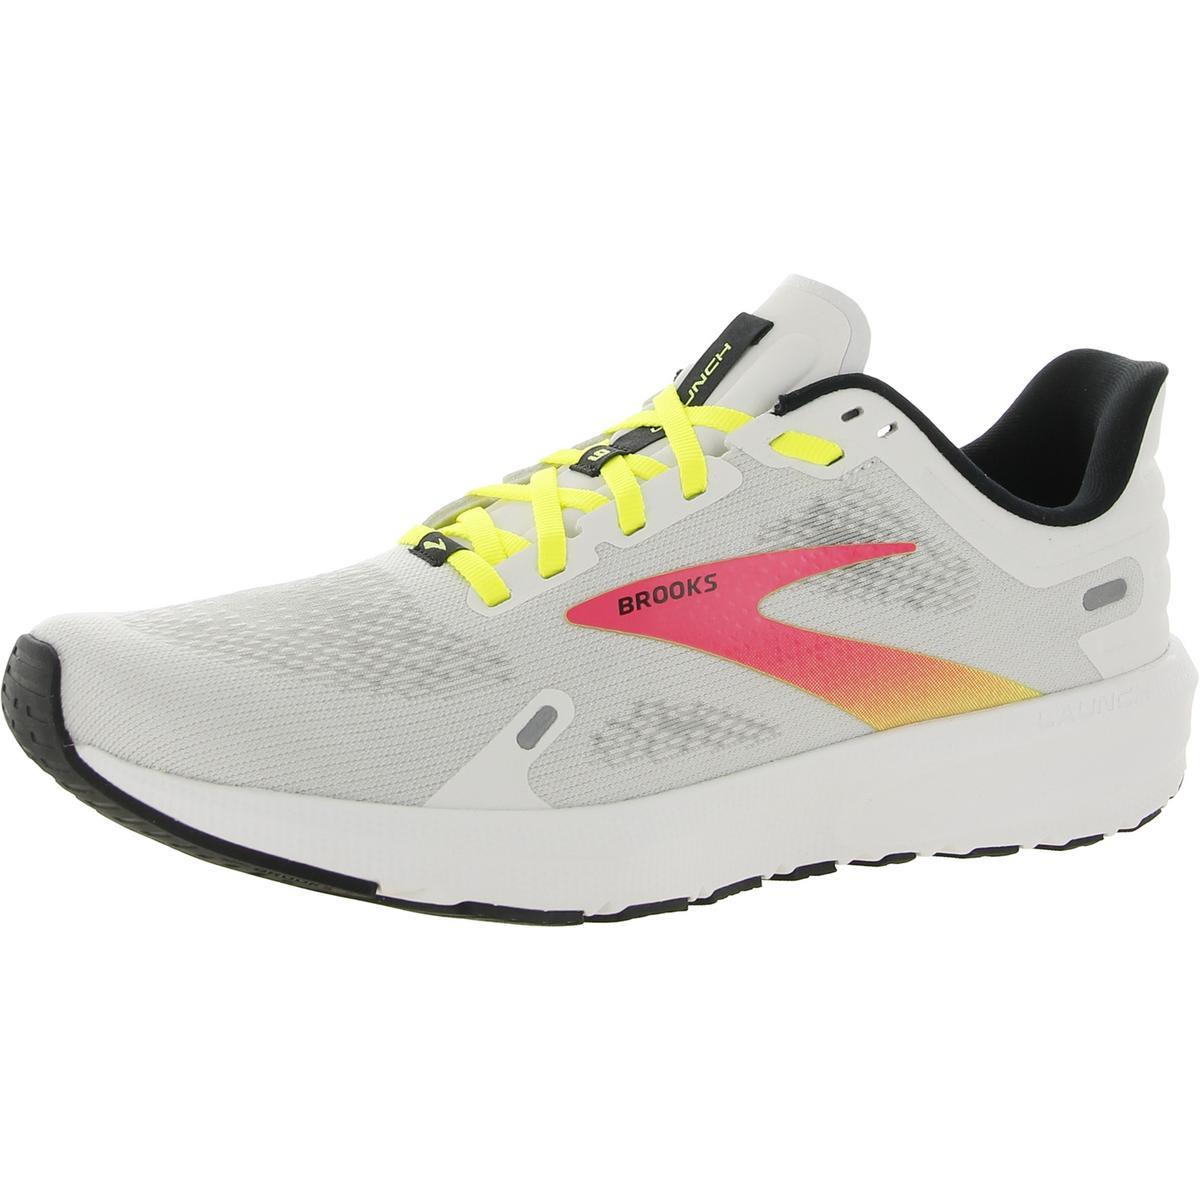 Brooks Womens Launch 9 Lace-up Athletic and Training Shoes Sneakers Bhfo 8050 Grey/Pink/Black